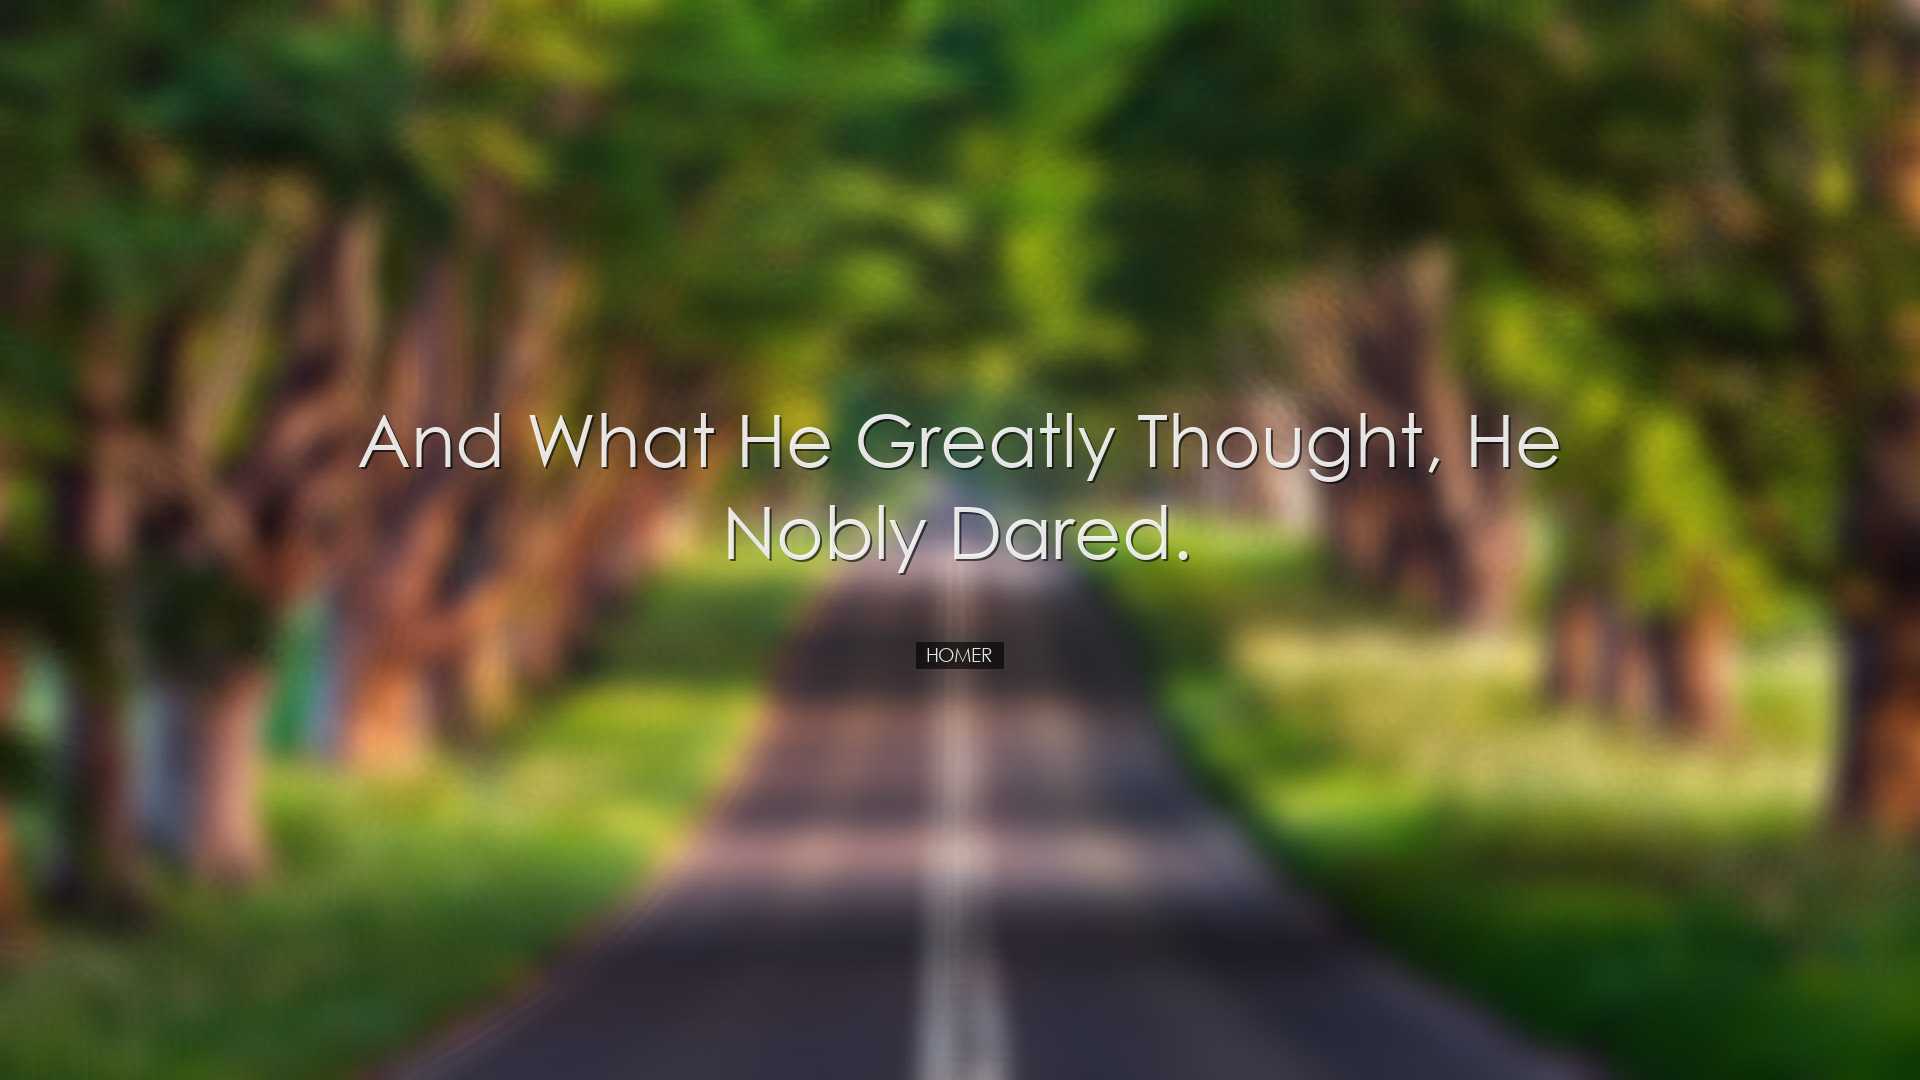 And what he greatly thought, he nobly dared. - Homer